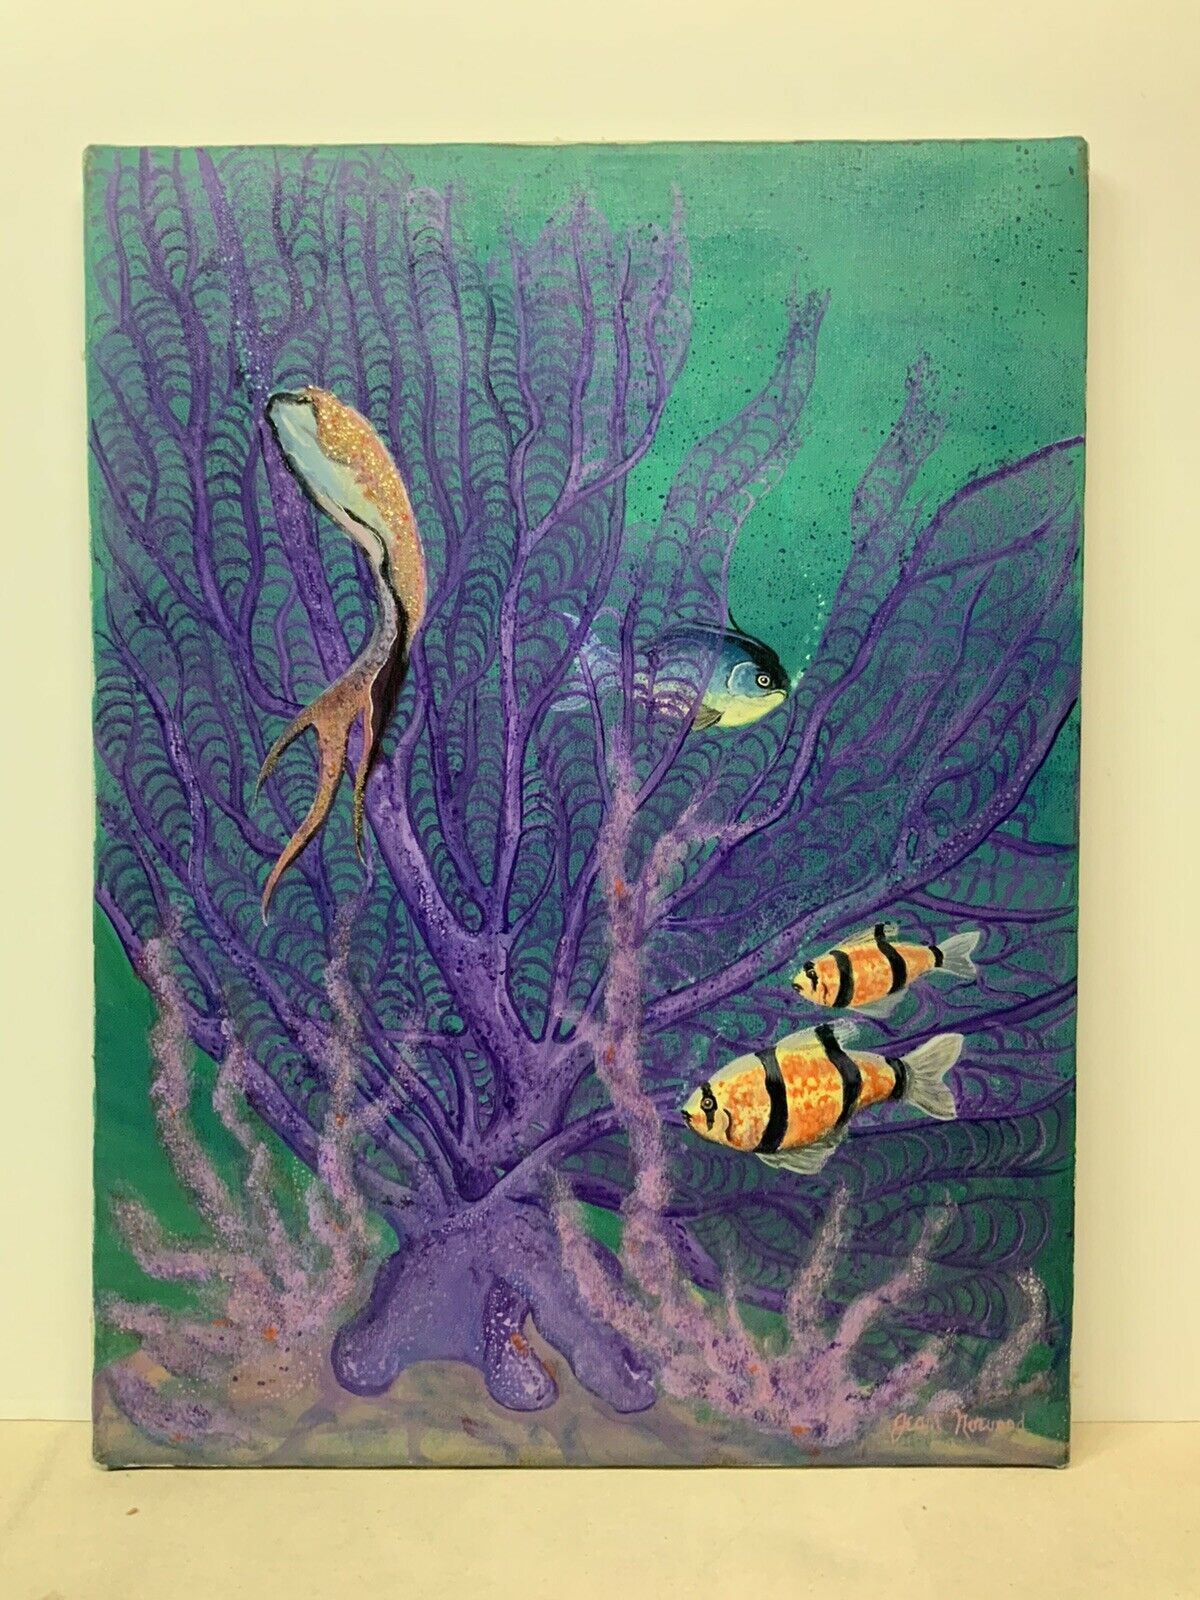 Original Oil Painting On Canvas Fish In Reef Glitter Signed Jean Norwood 18x24”